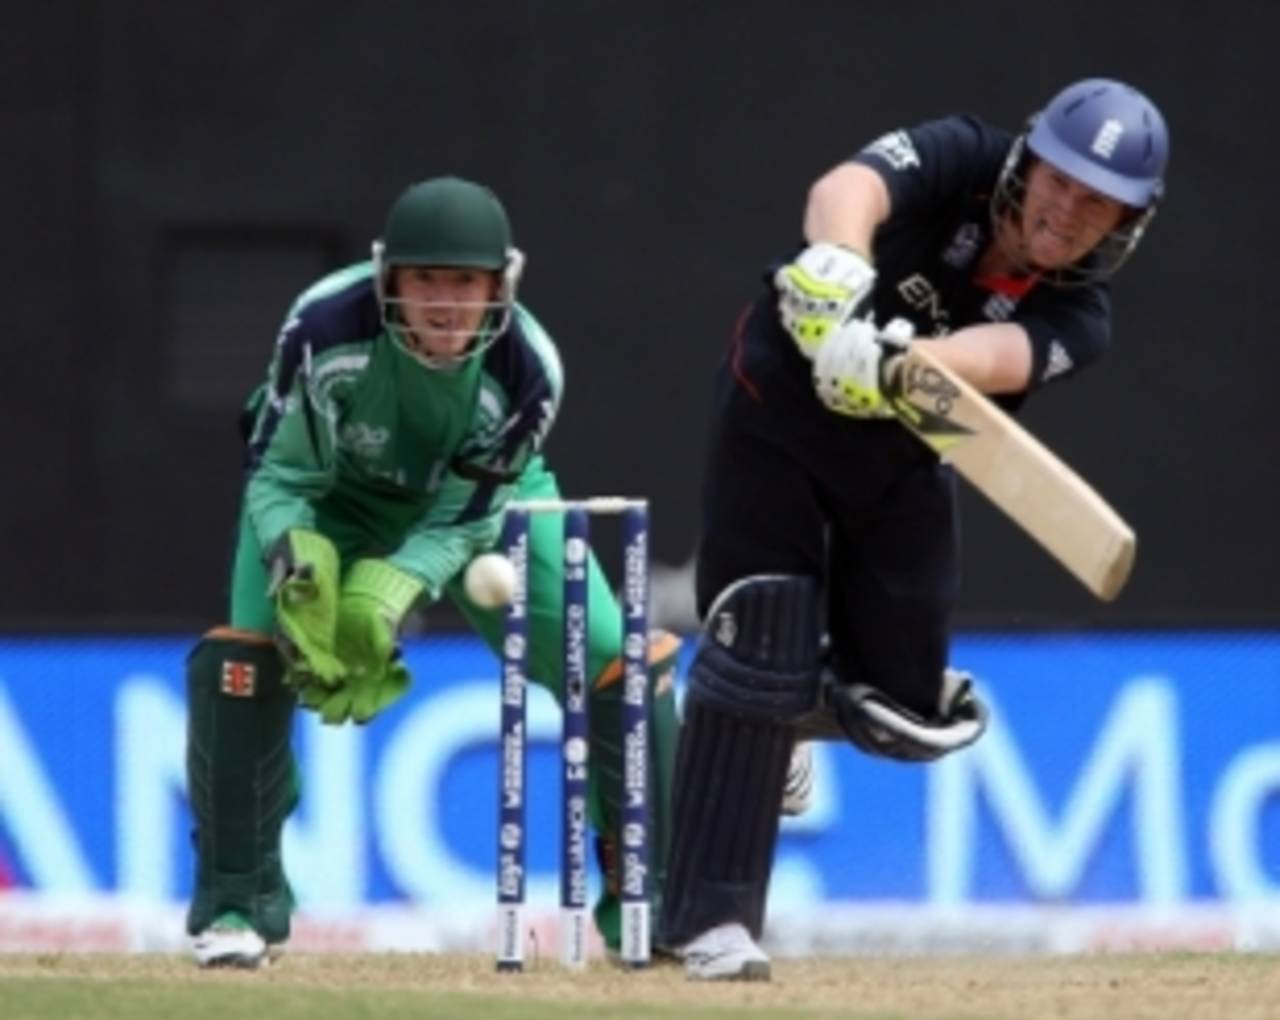 Once again Eoin Morgan provided the spark in England's middle order, England v Ireland, World Twenty20, Guyana, May 4, 2010